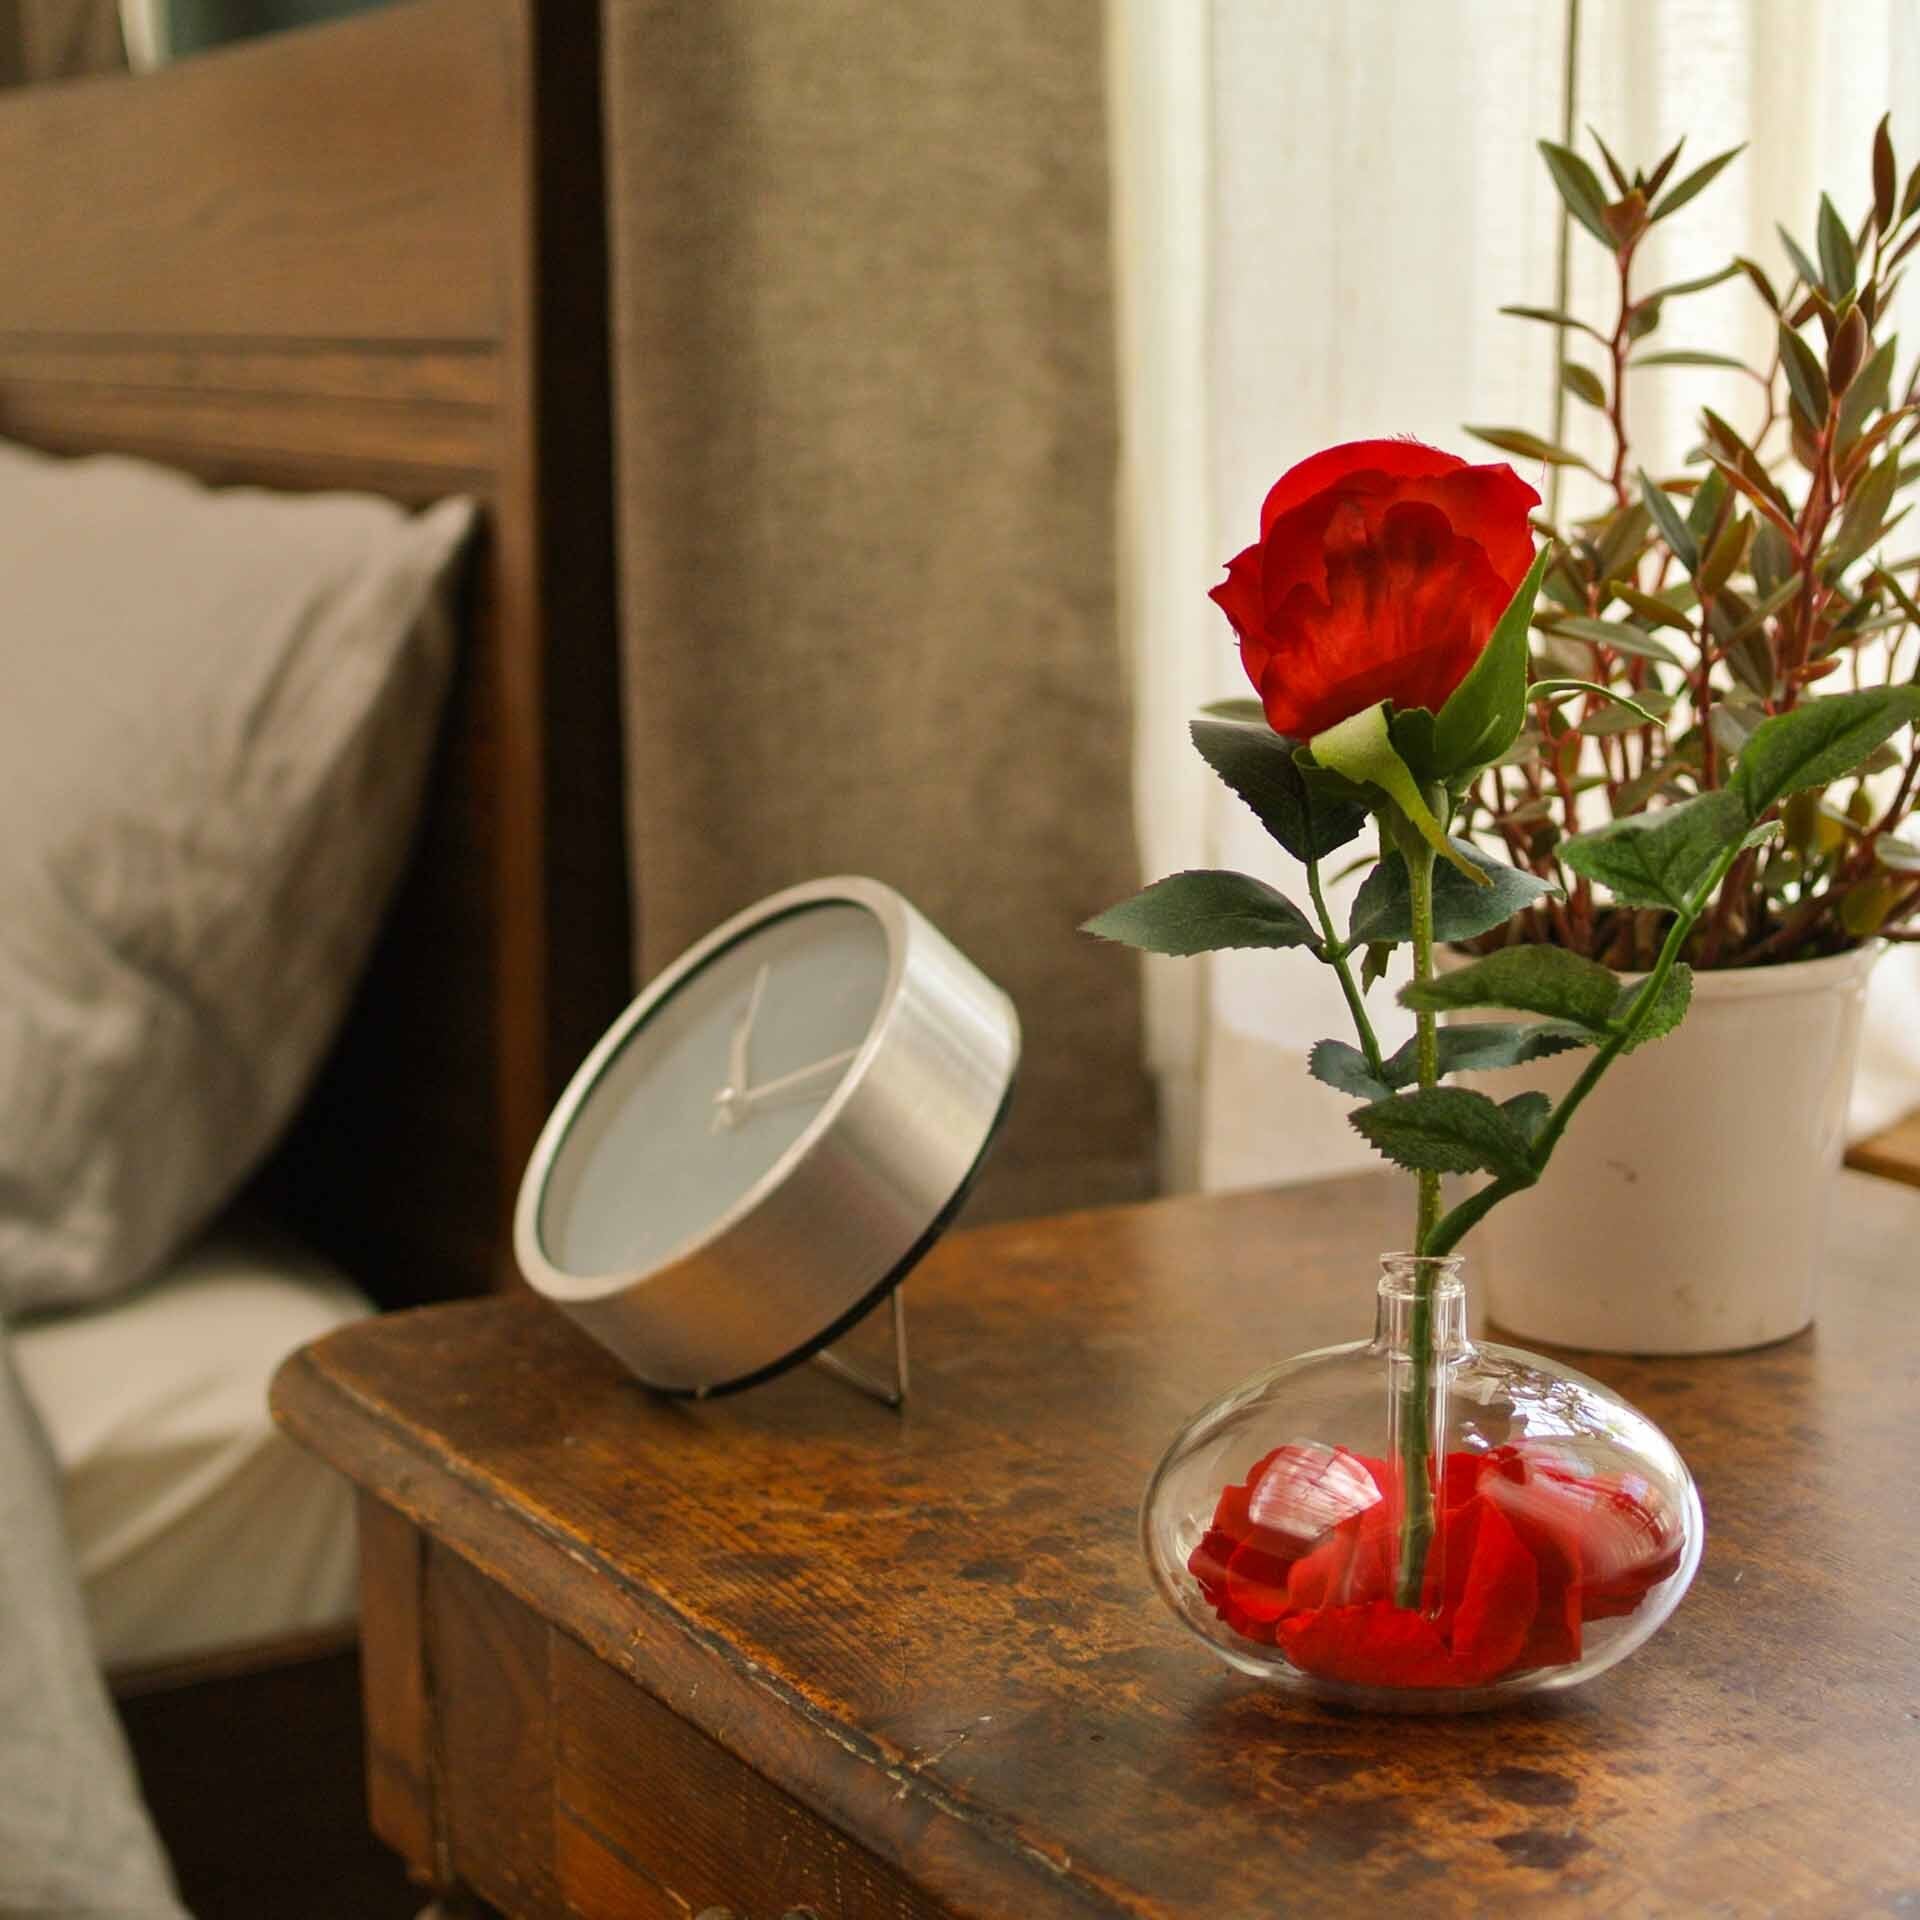 Red rose with red rose petals inside an oval shaped glass diffuser with natural wood wand and round knob, seated on a mahogany nightstand with silver analog clock and white potted plant with a bed with grey comforter, pillow, and white linen sheet in the background..